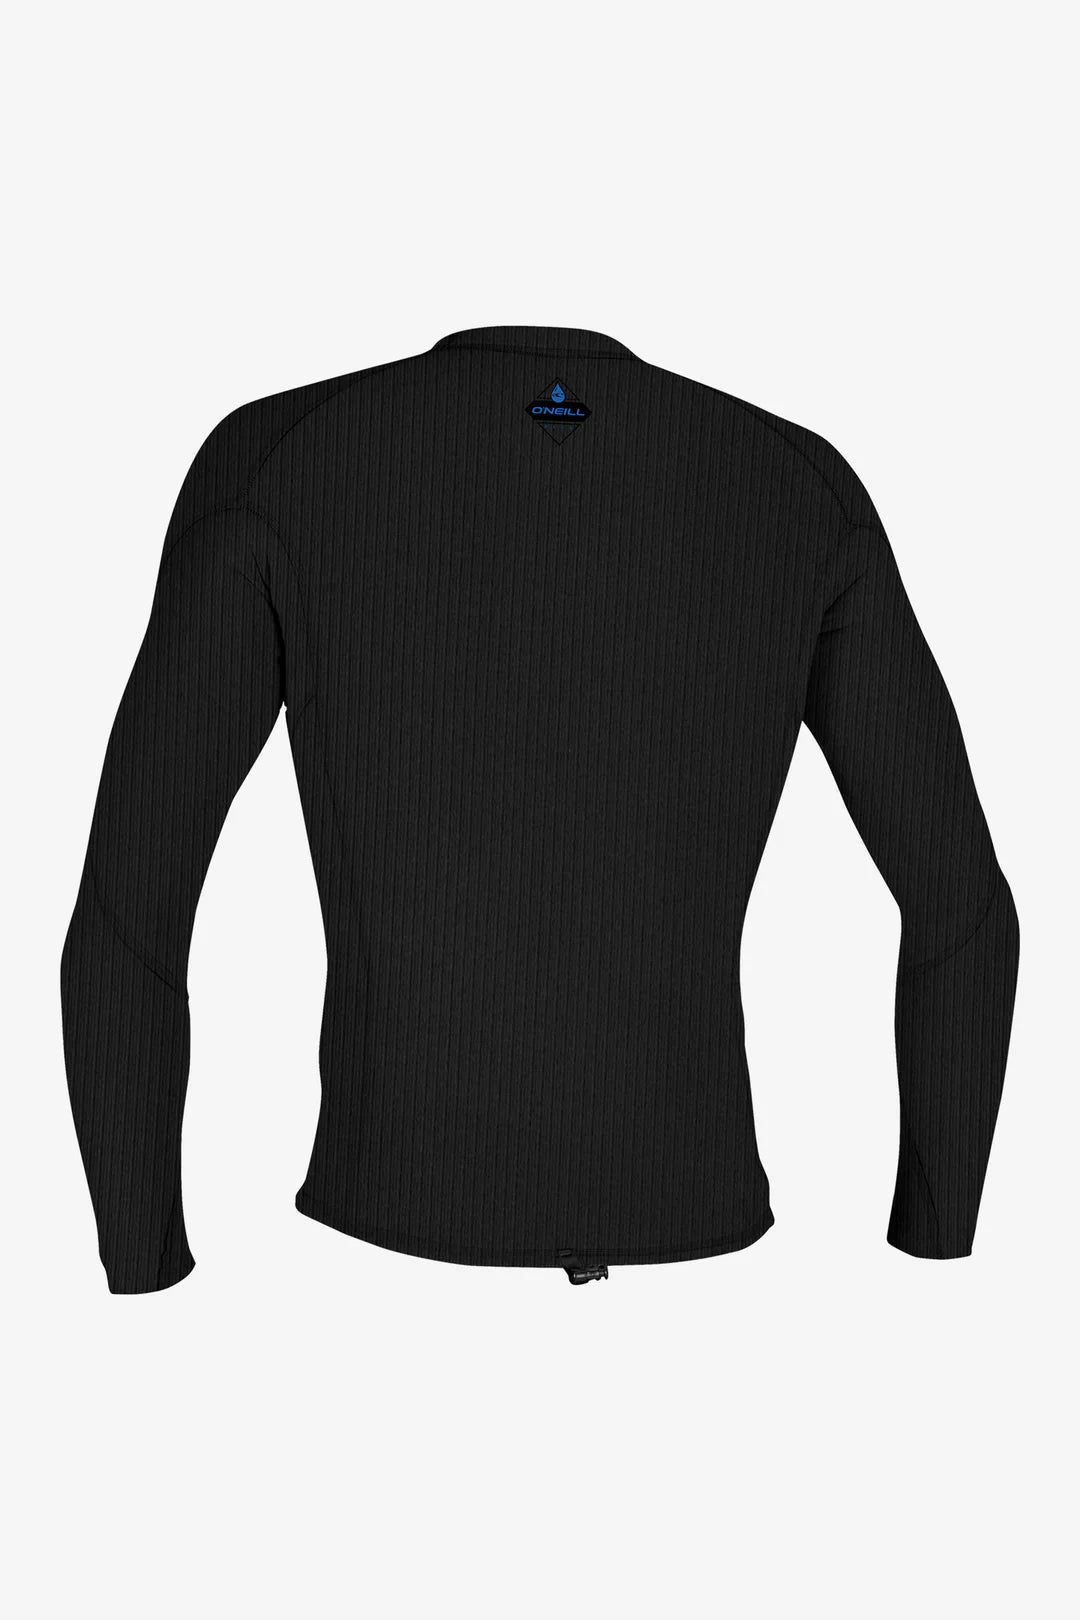 O'neill Youth Hyperfreak L/S Neo Top Comp-X BLK